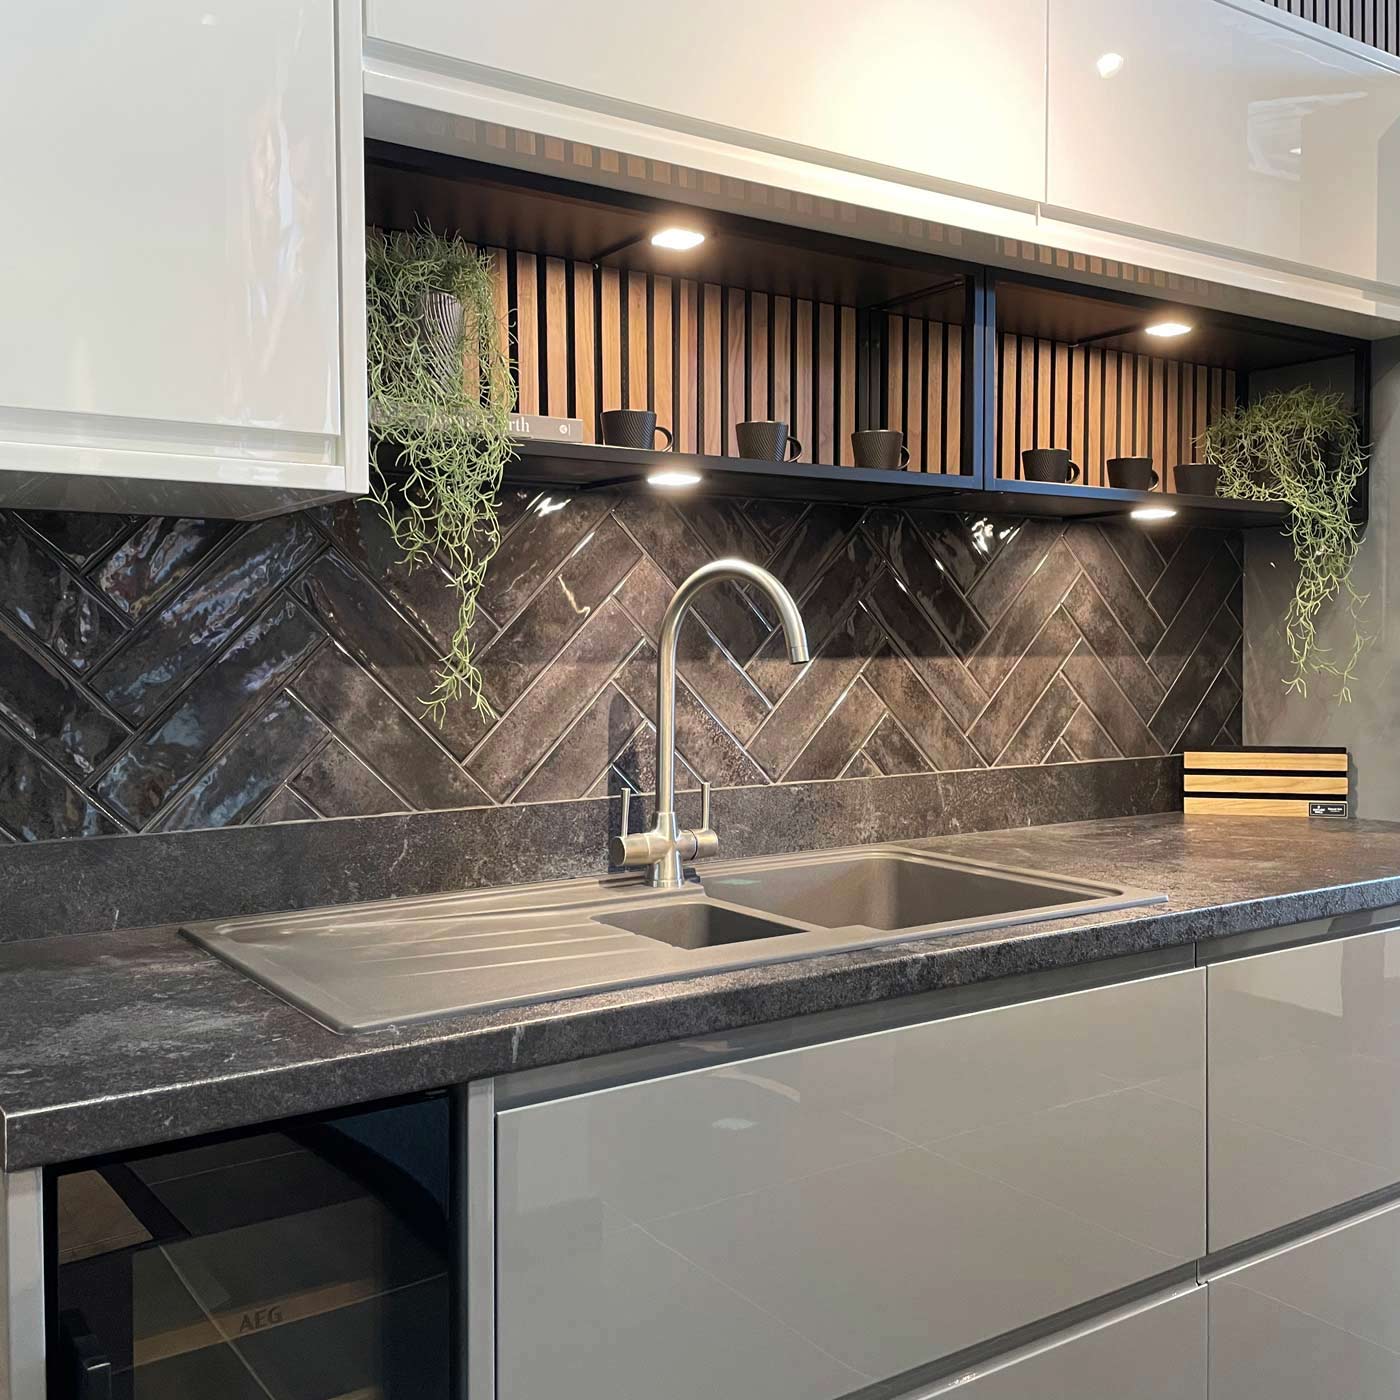 nissel black wall tile as a kitchen splash back with white kitchen units and sink tap